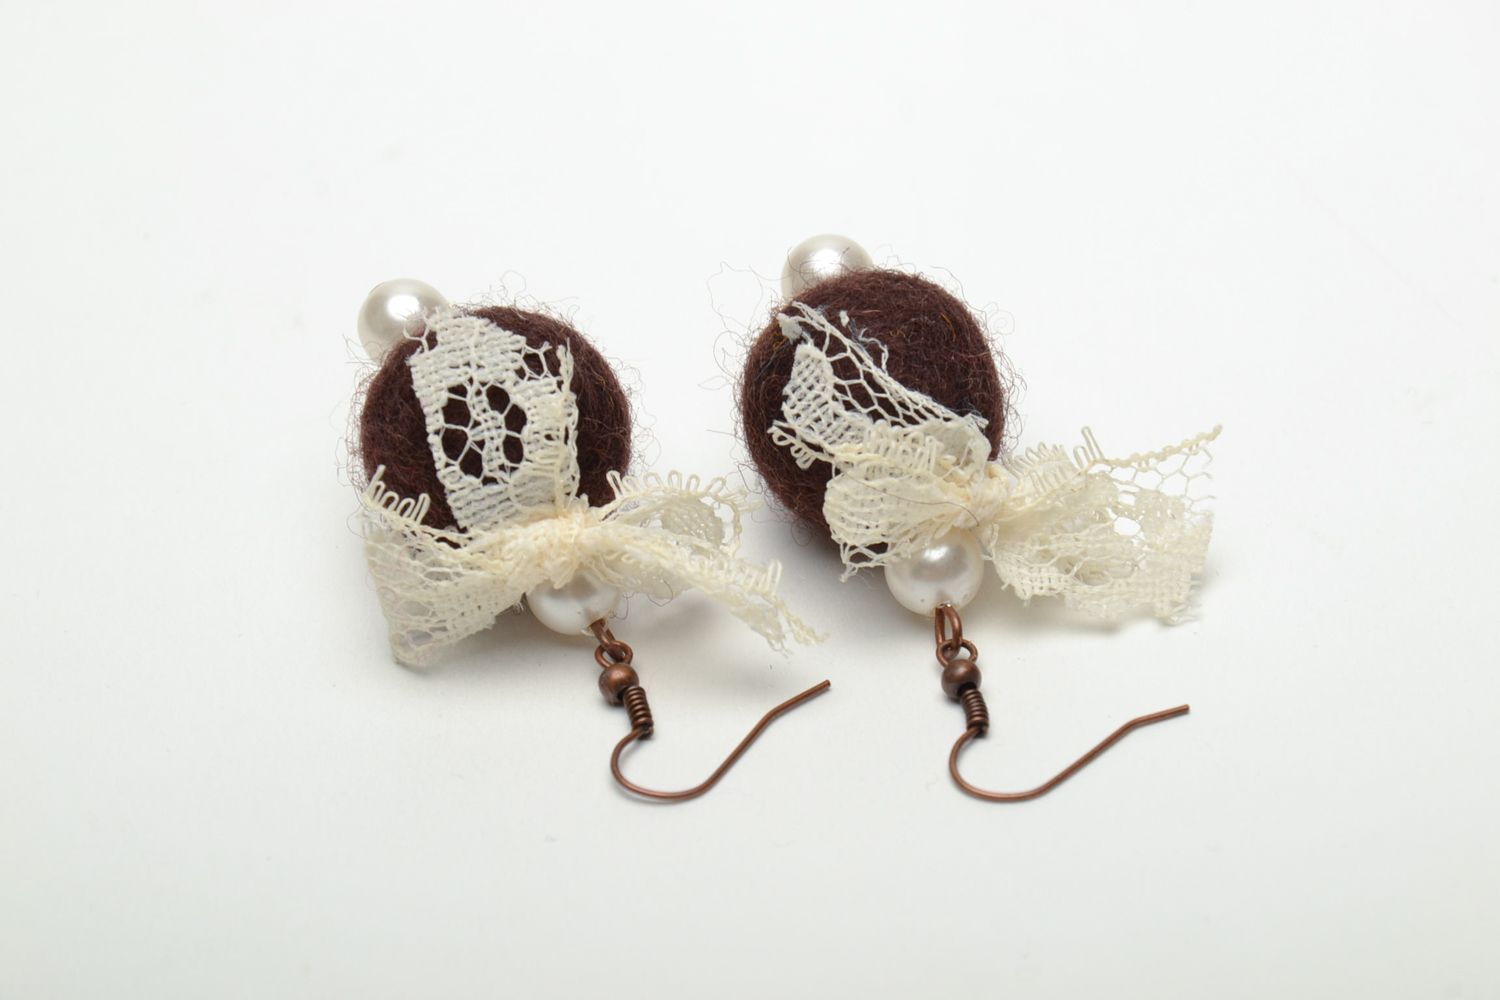 Round felted wool earrings of brown color with pearls photo 5